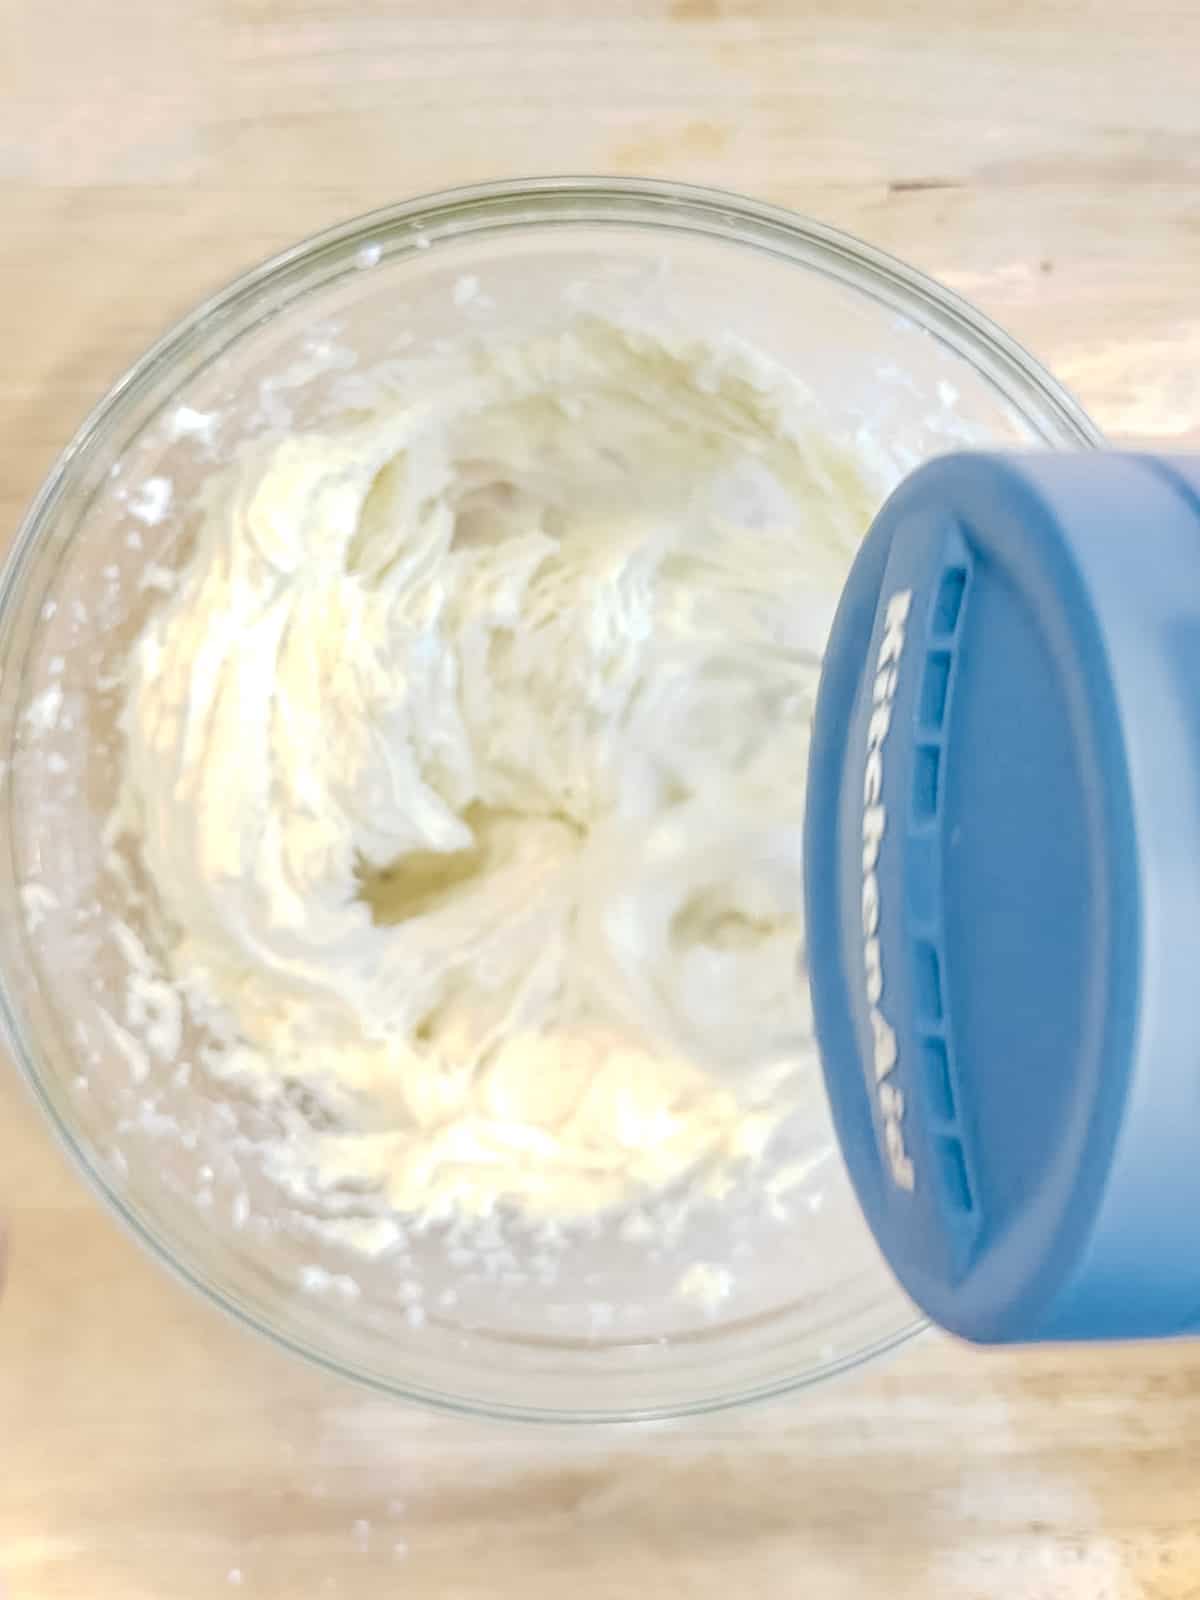 Using a hand mixer to make cream cheese frosting.